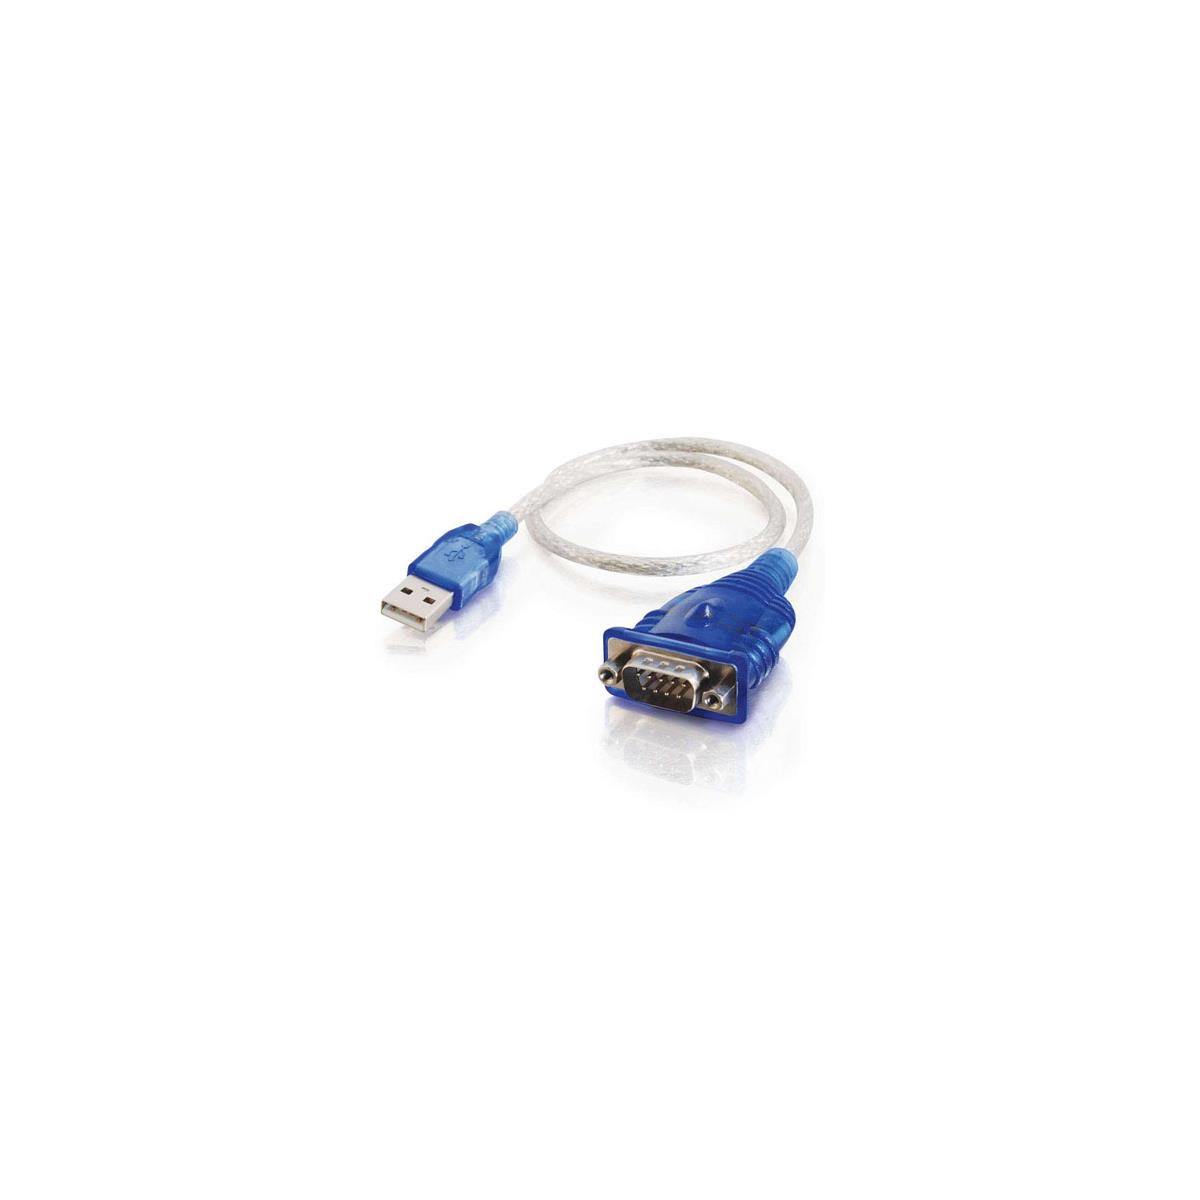 Image of C2G Cables to Go 1.5' USB to DB9 Serial Adapter Cable